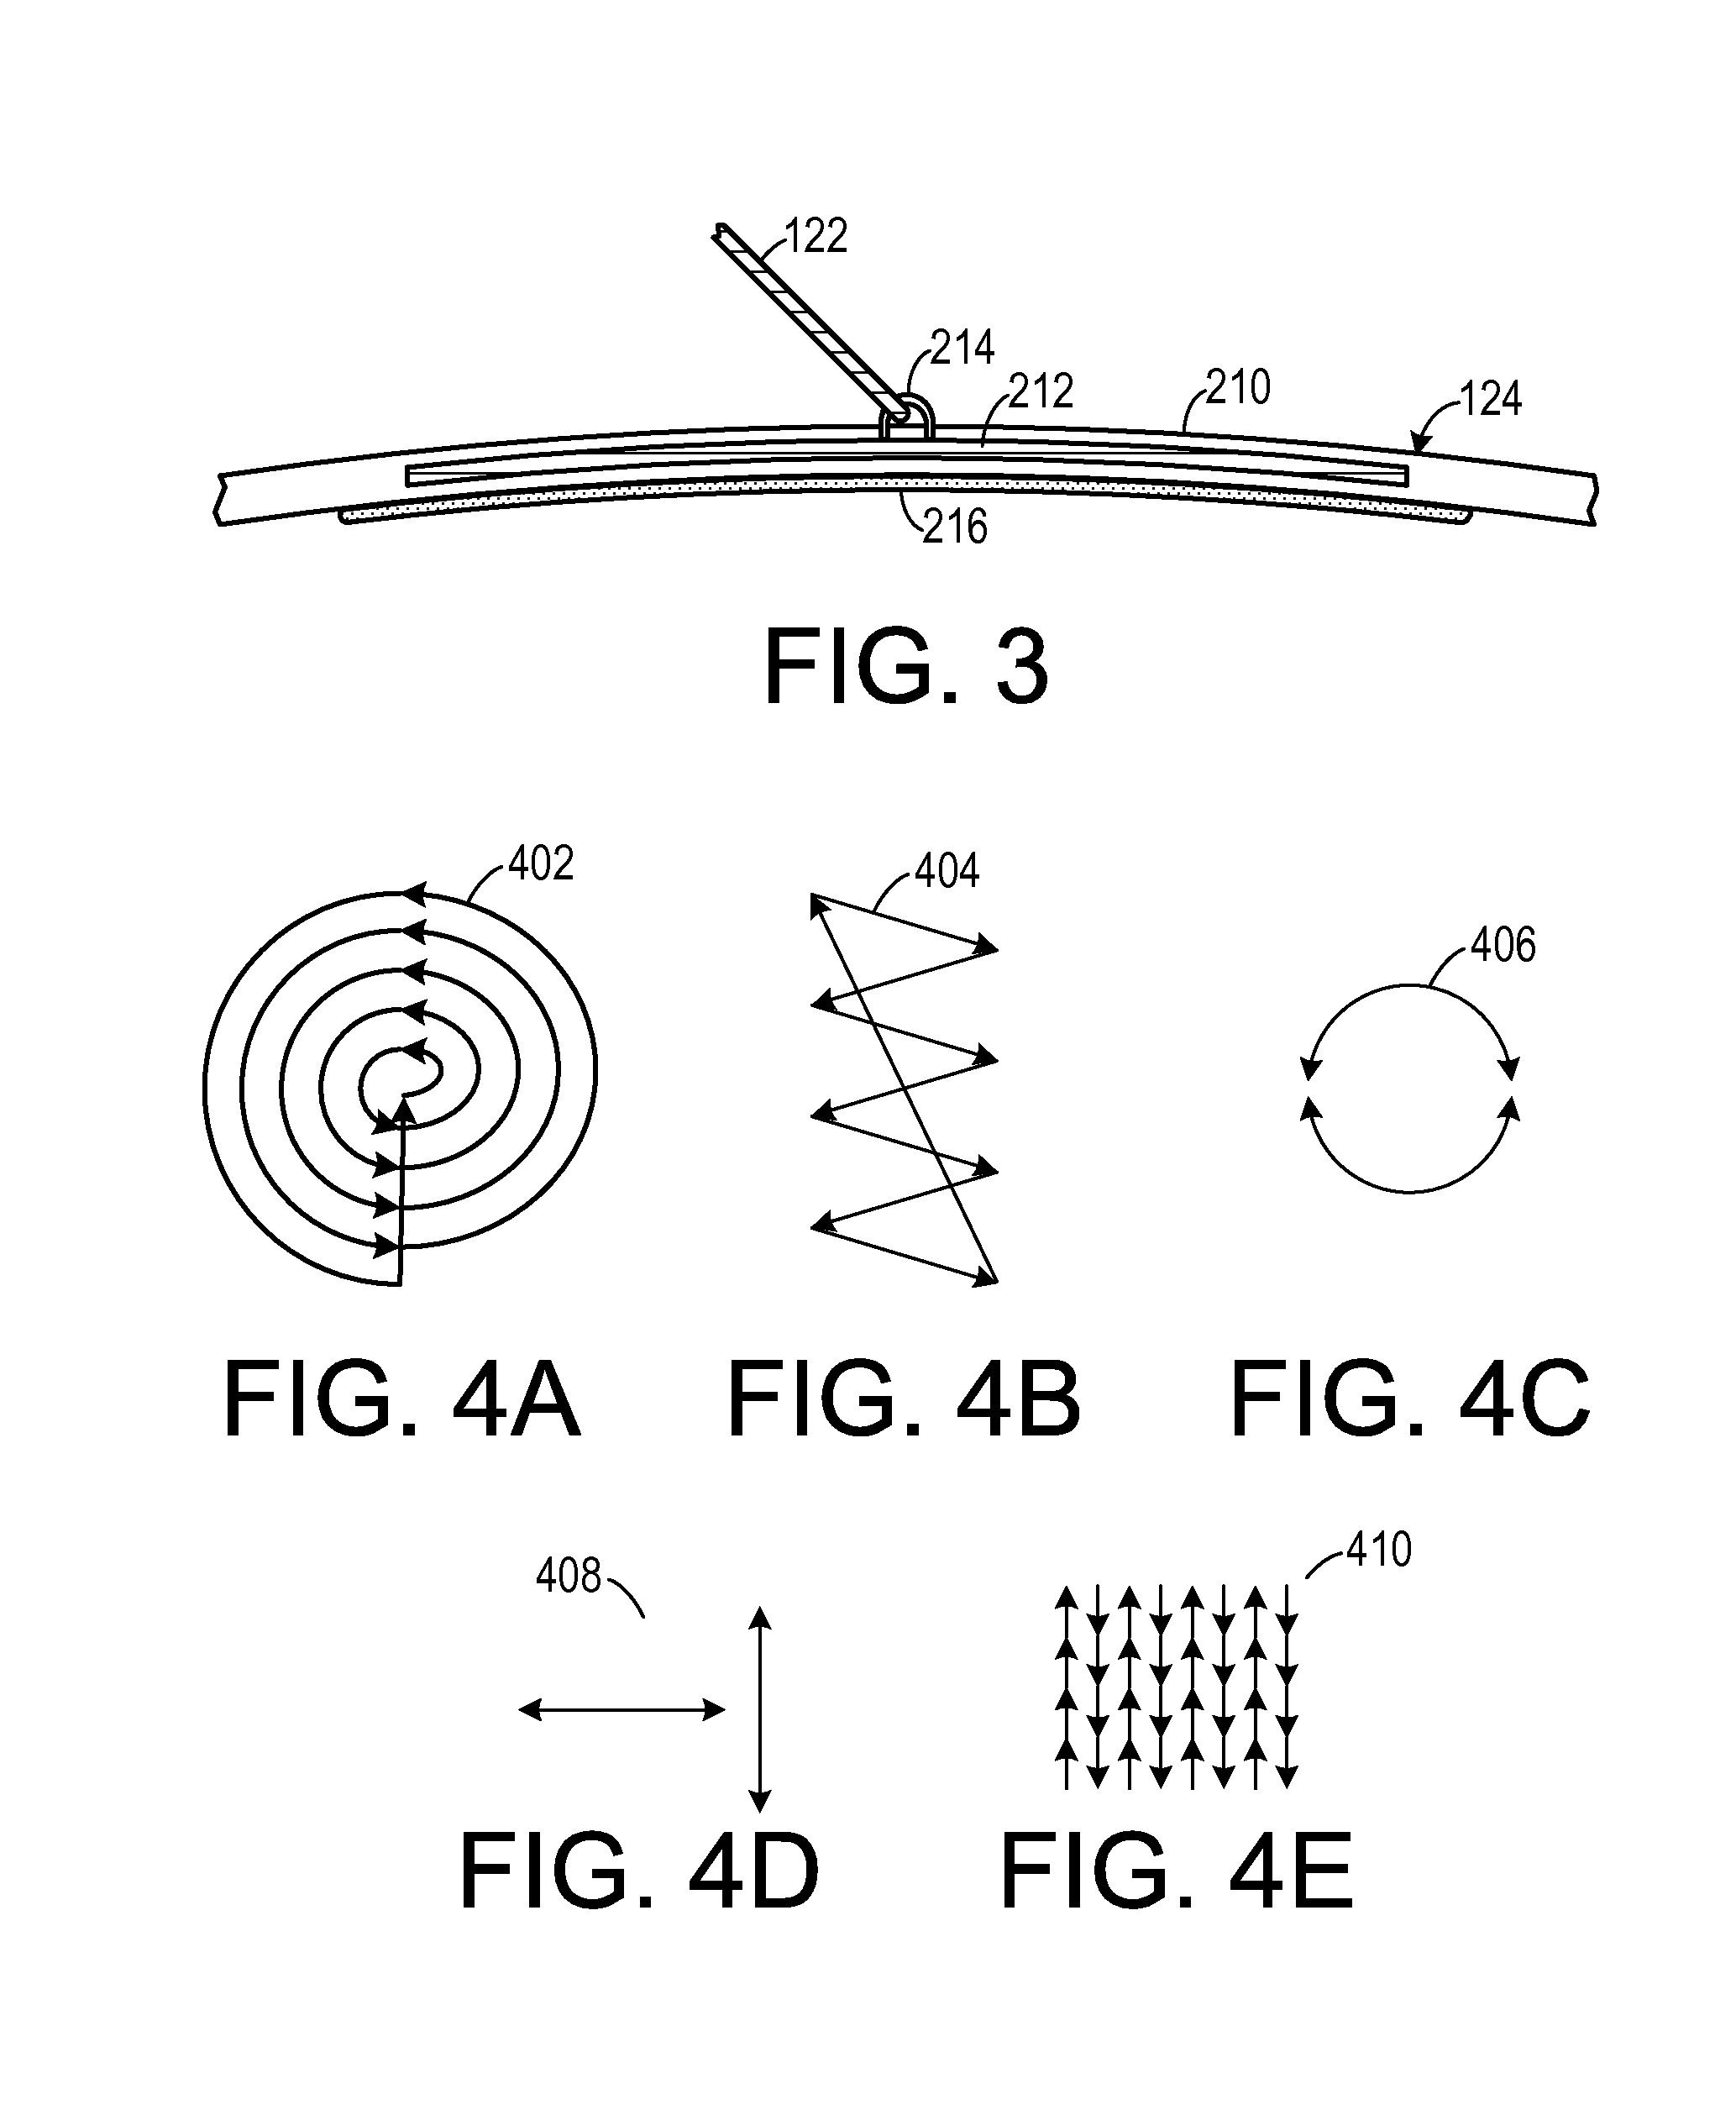 Spinal distraction device with three dimensionally vibrating matrix head